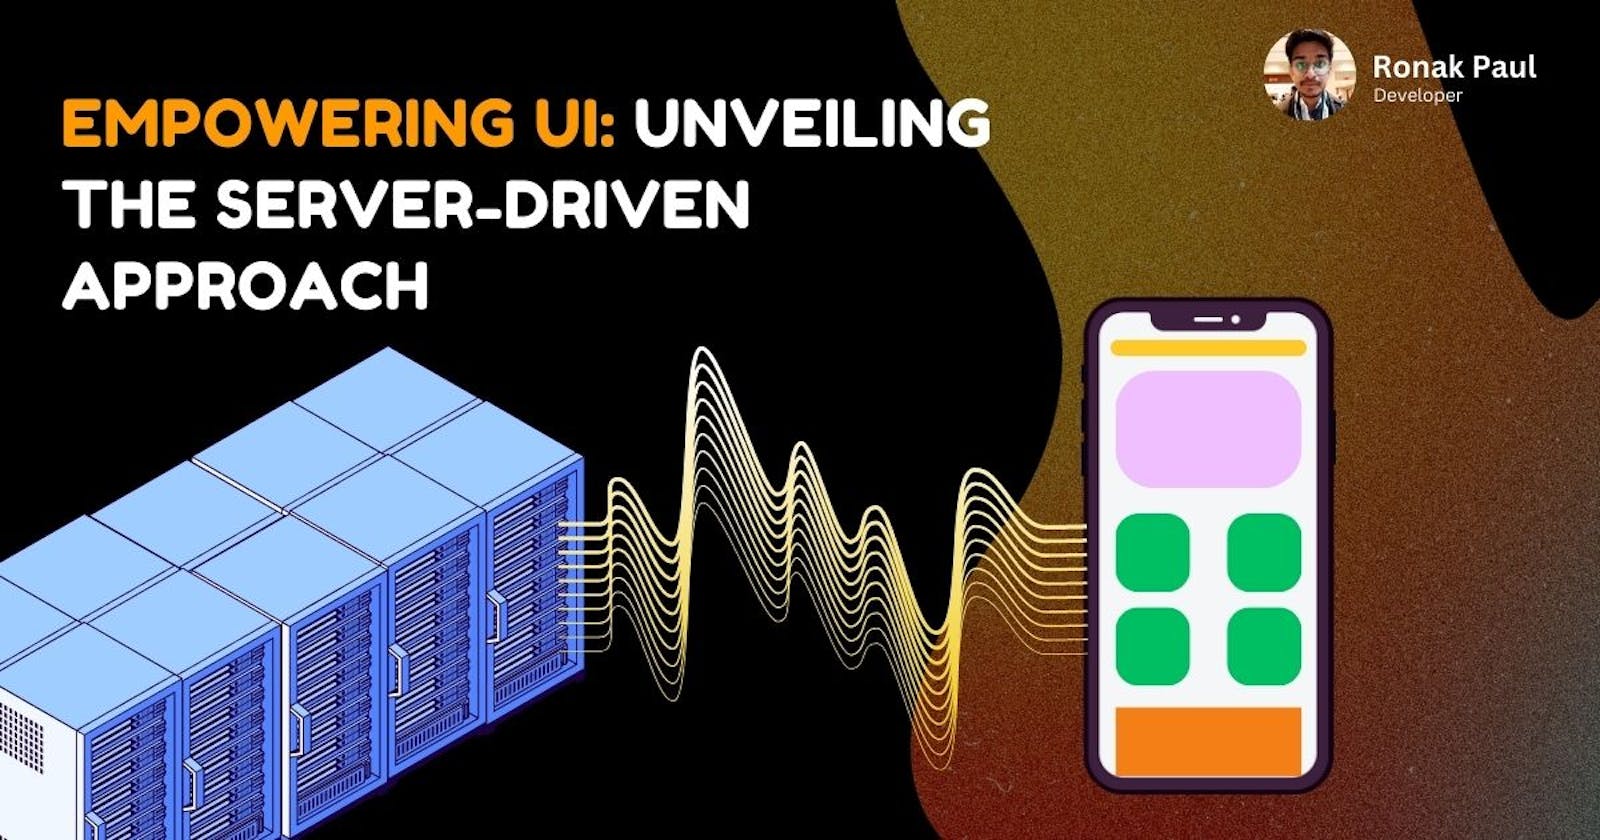 Empowering UI: Unveiling the Server-Driven Approach